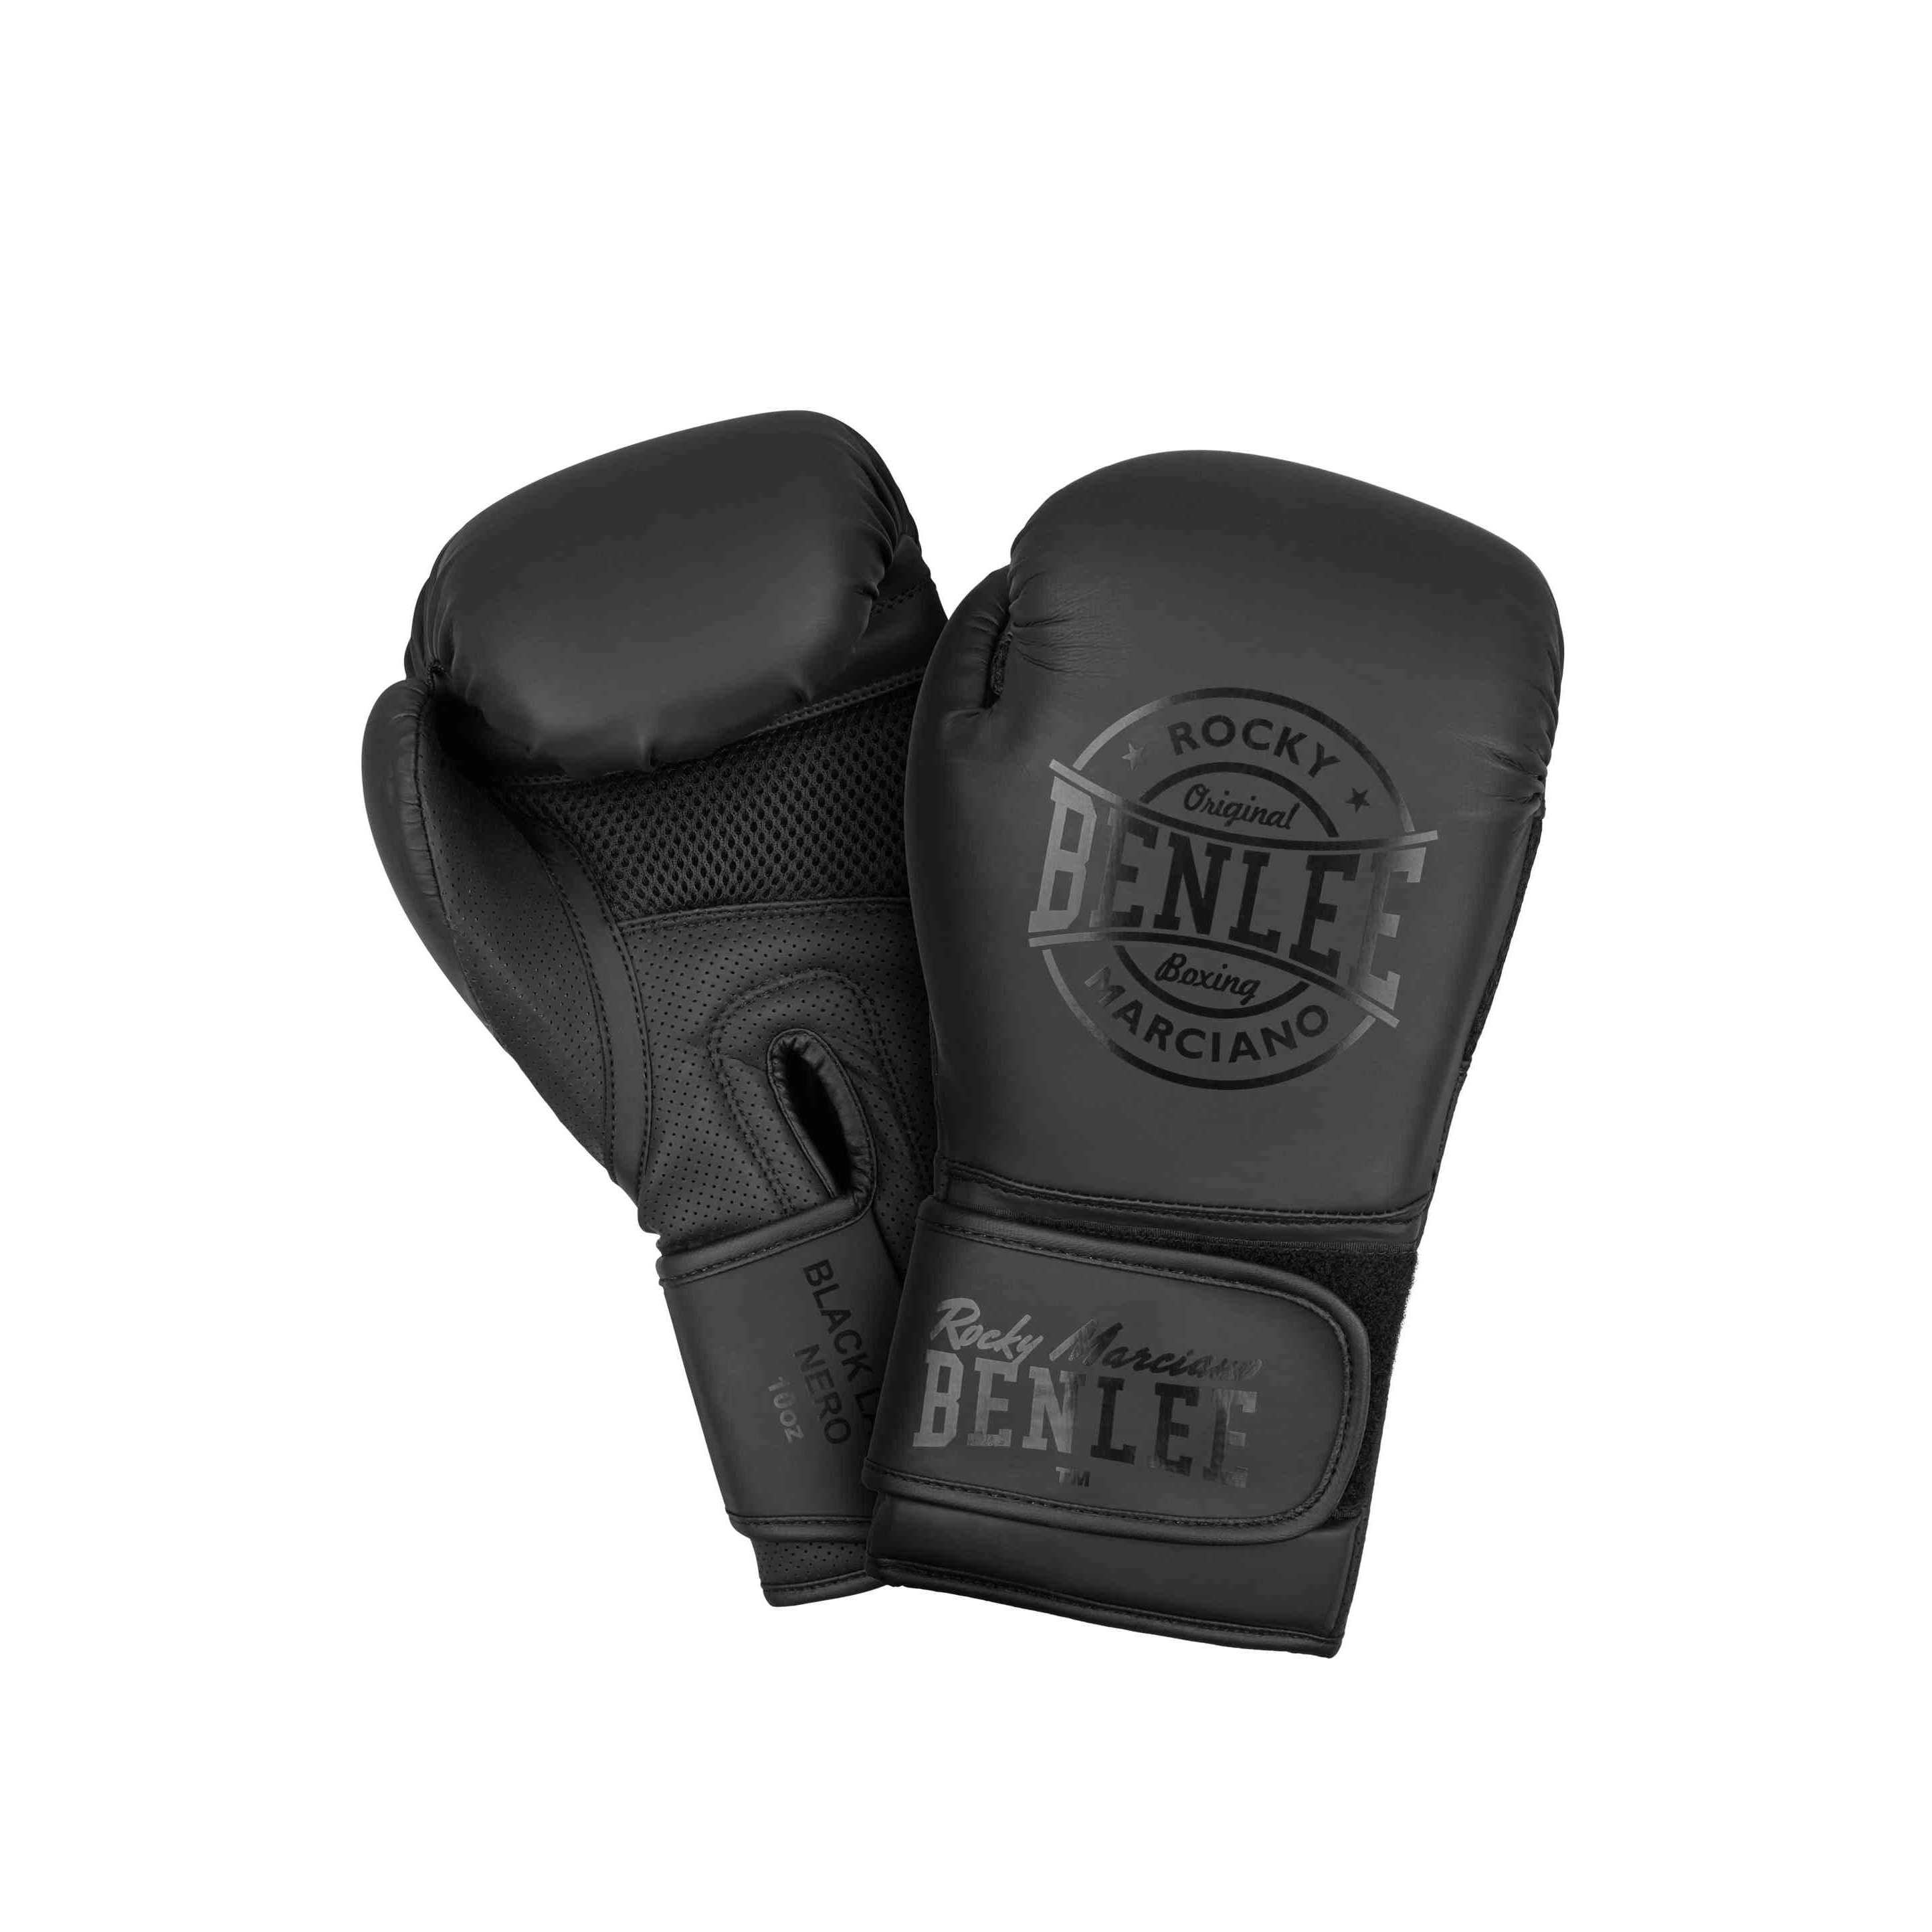 Benlee Artificial Leather Boxing Gloves, Light Black